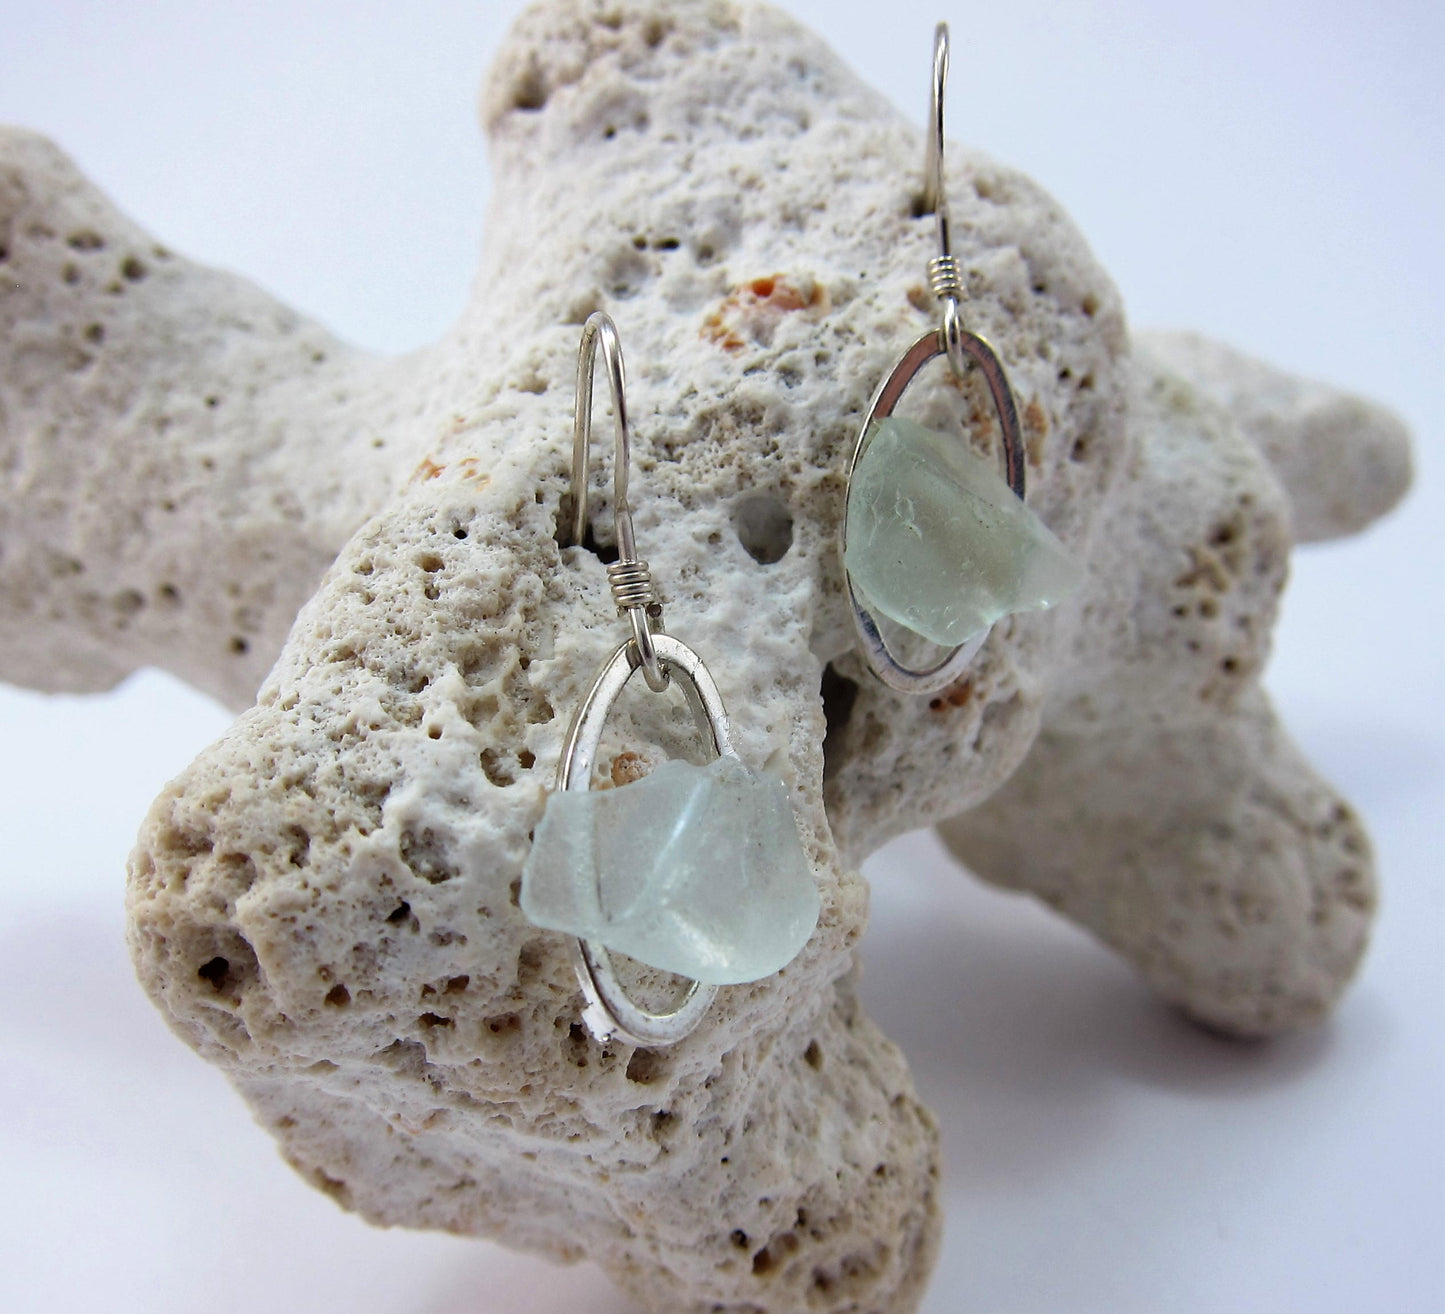 Littest's Mermaid's Tears Earrings -  White sea glass from South Shore of Nova Scotia, Canada on small silverplate oval